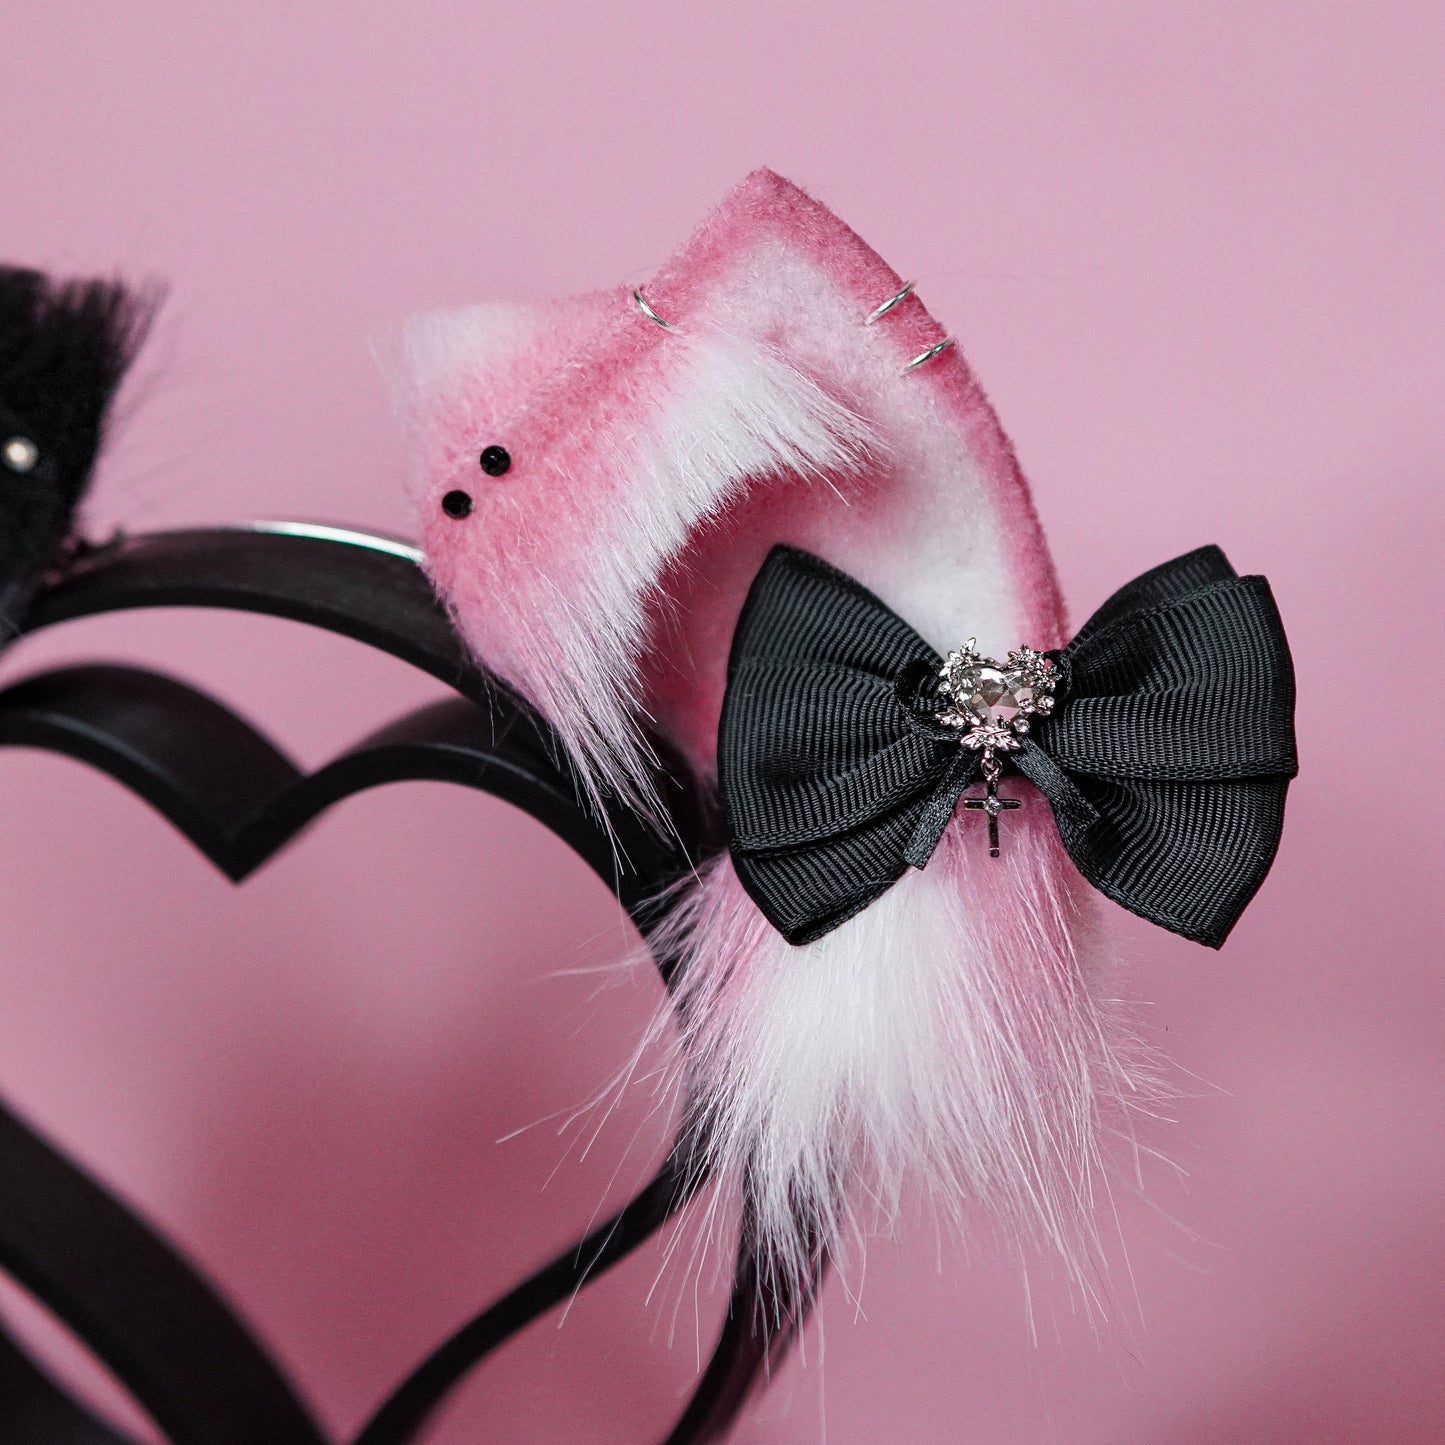 Unmatched Cat Ears in black and pink with charms